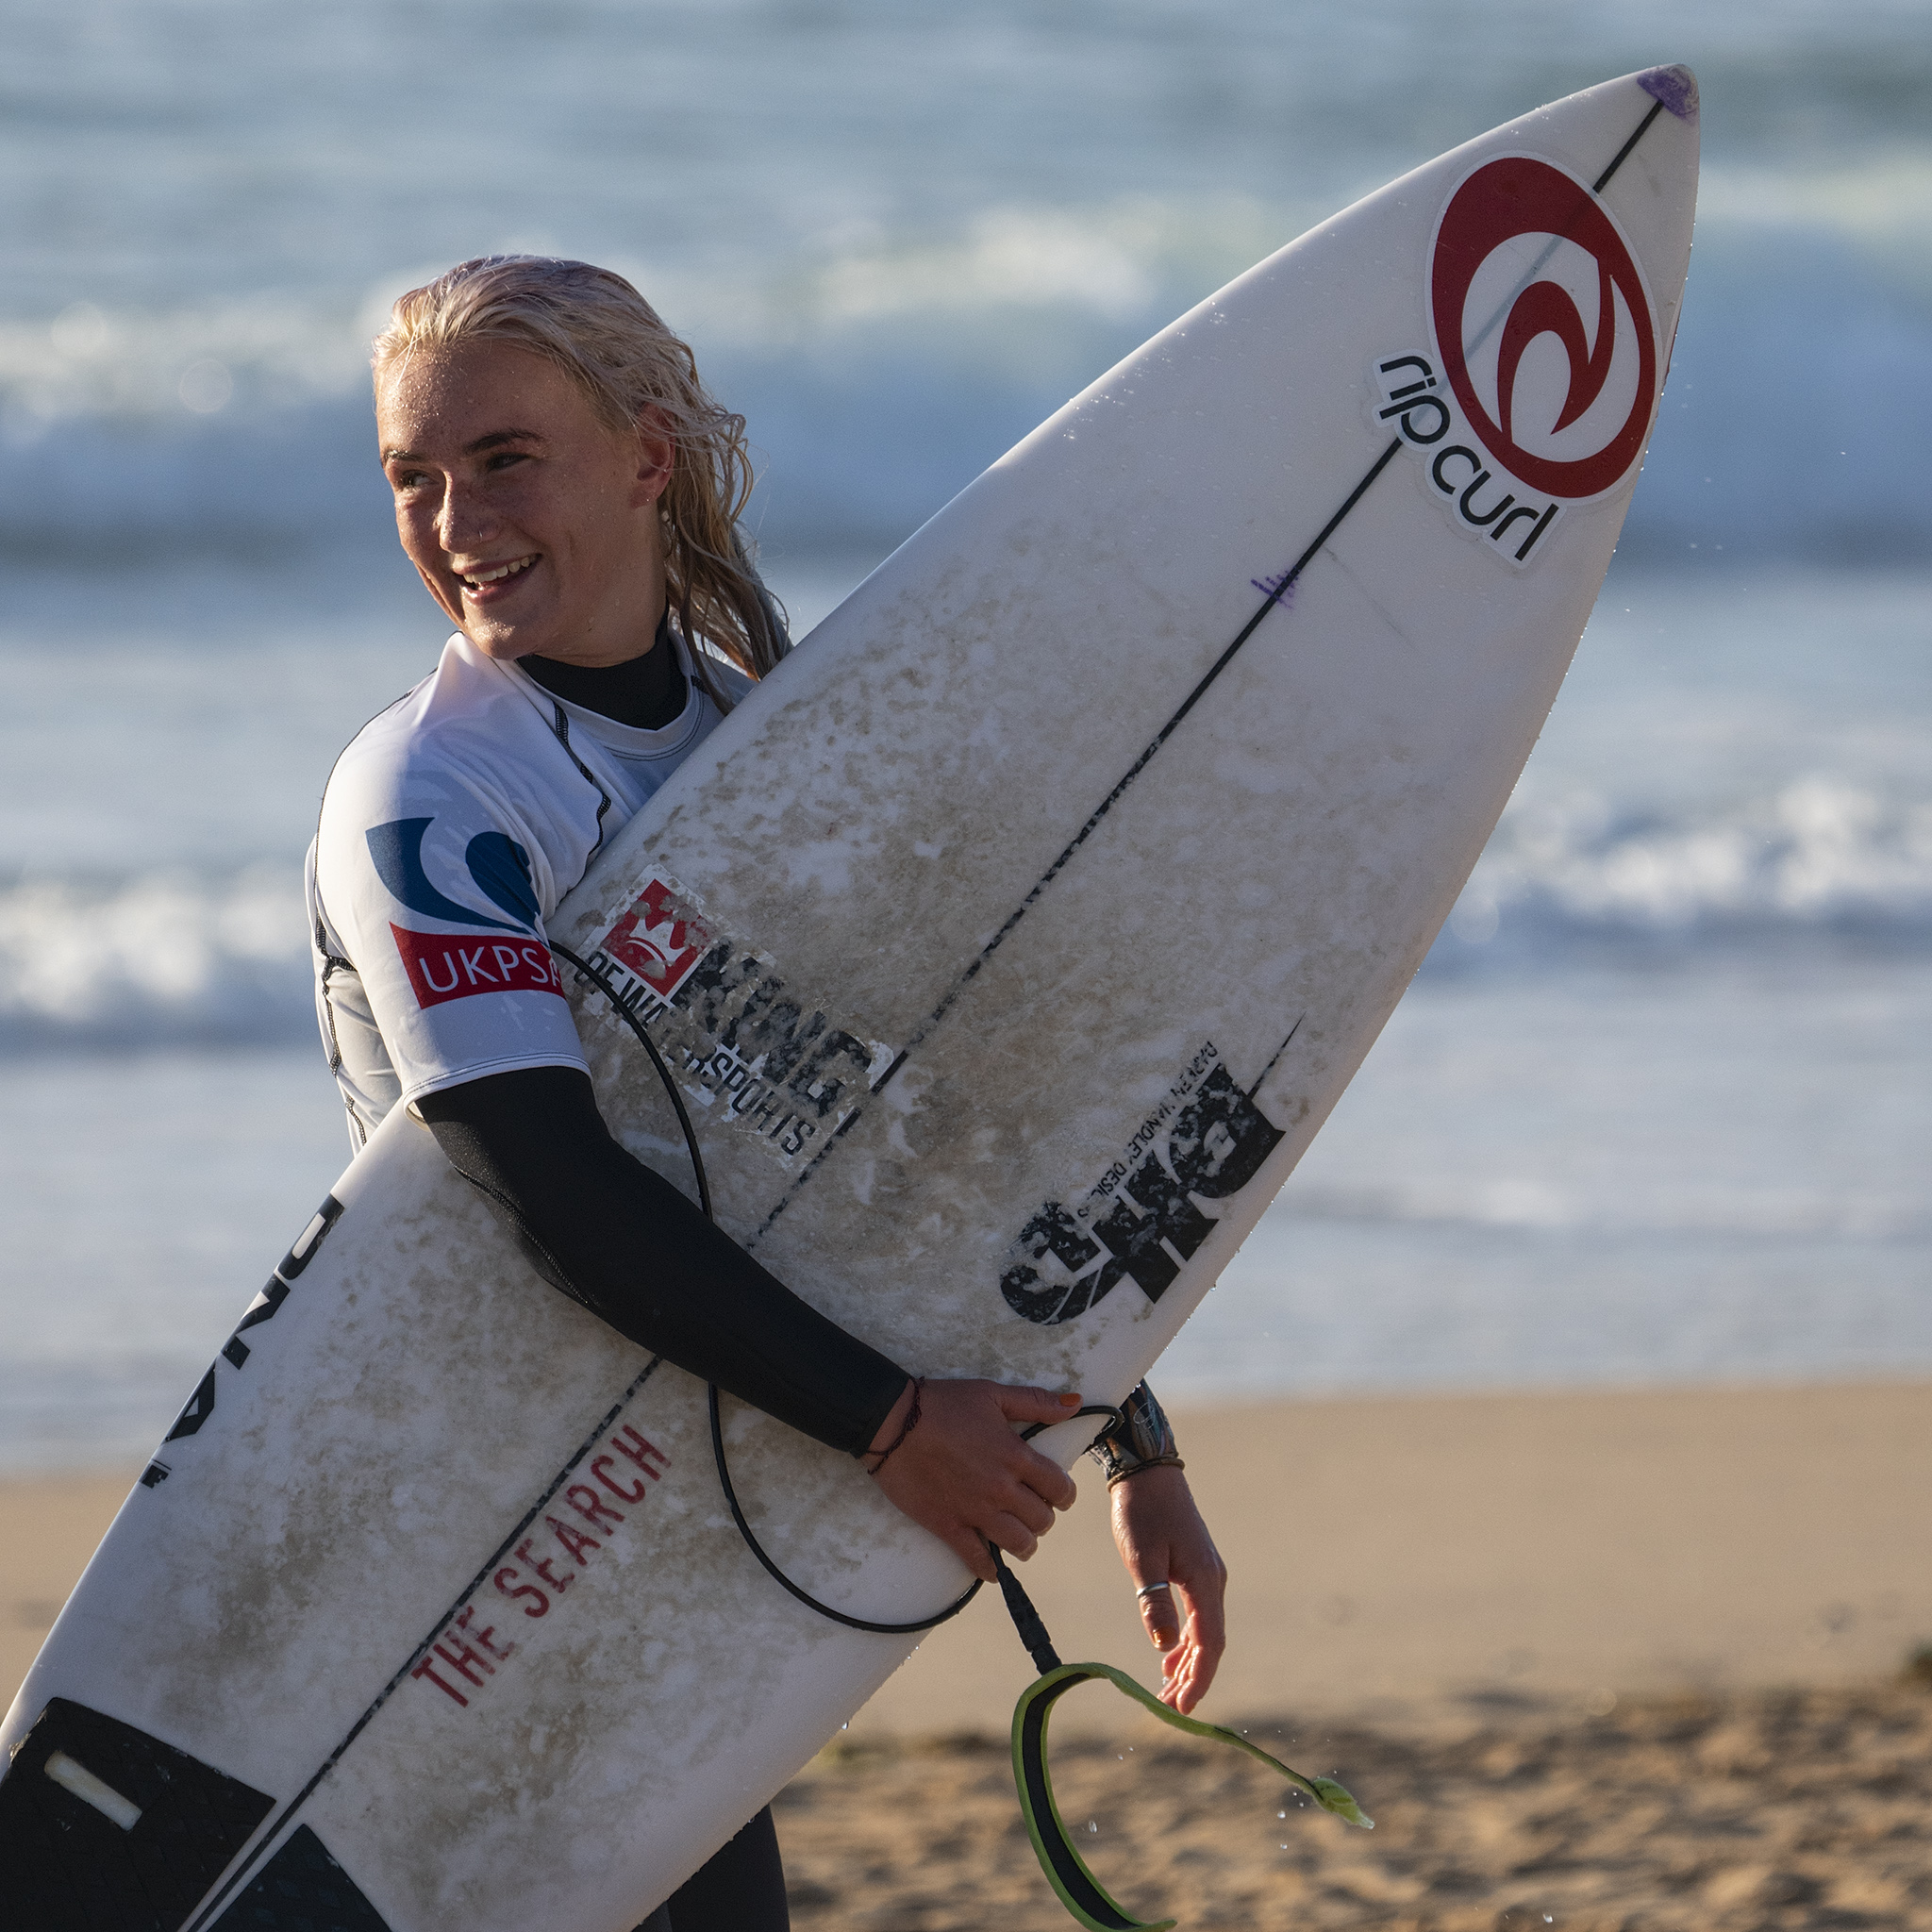 NIGHT SURF: GROMMETS ON THE RISE IN THE OPENING EVENT OF THE UK PRO ...